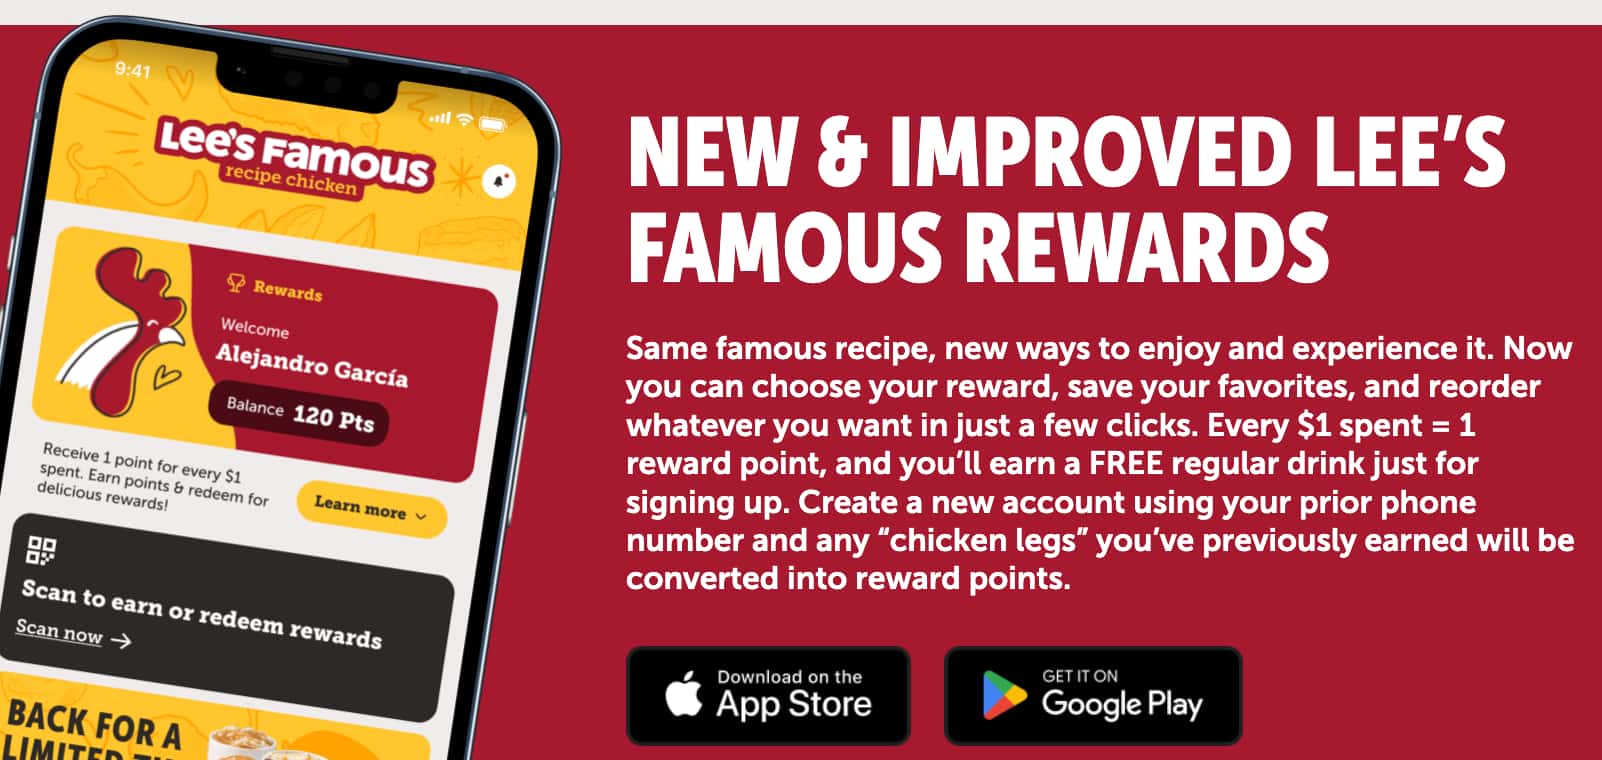 Lee's Famous Chicken rewards and coupons